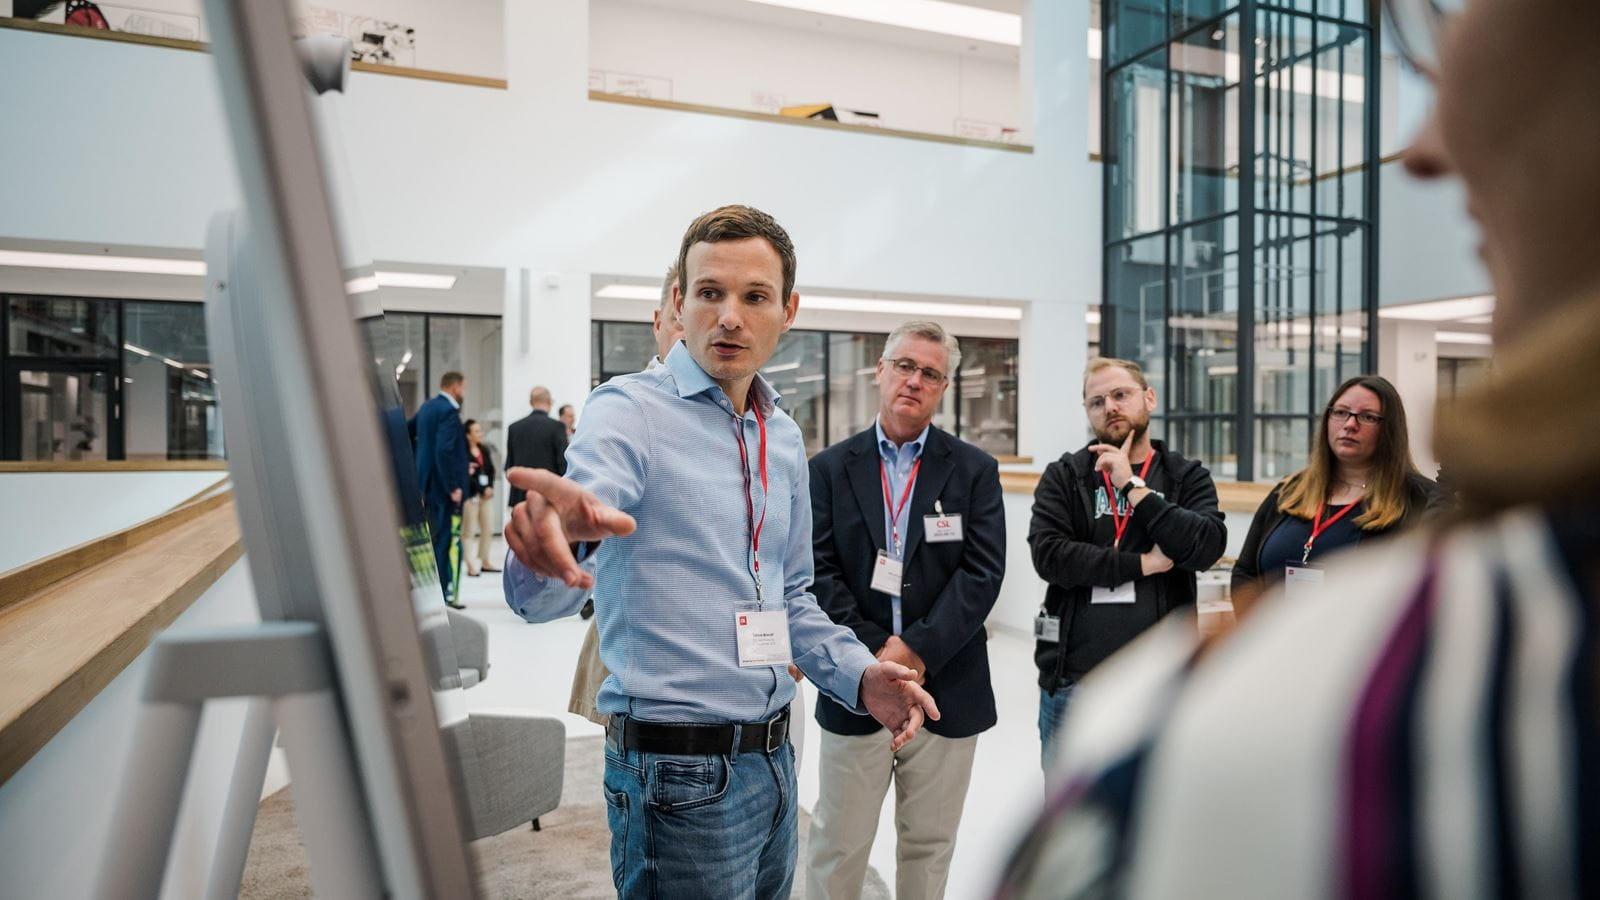 A tour guide explains the M600 R&D building to a group during the launch event.